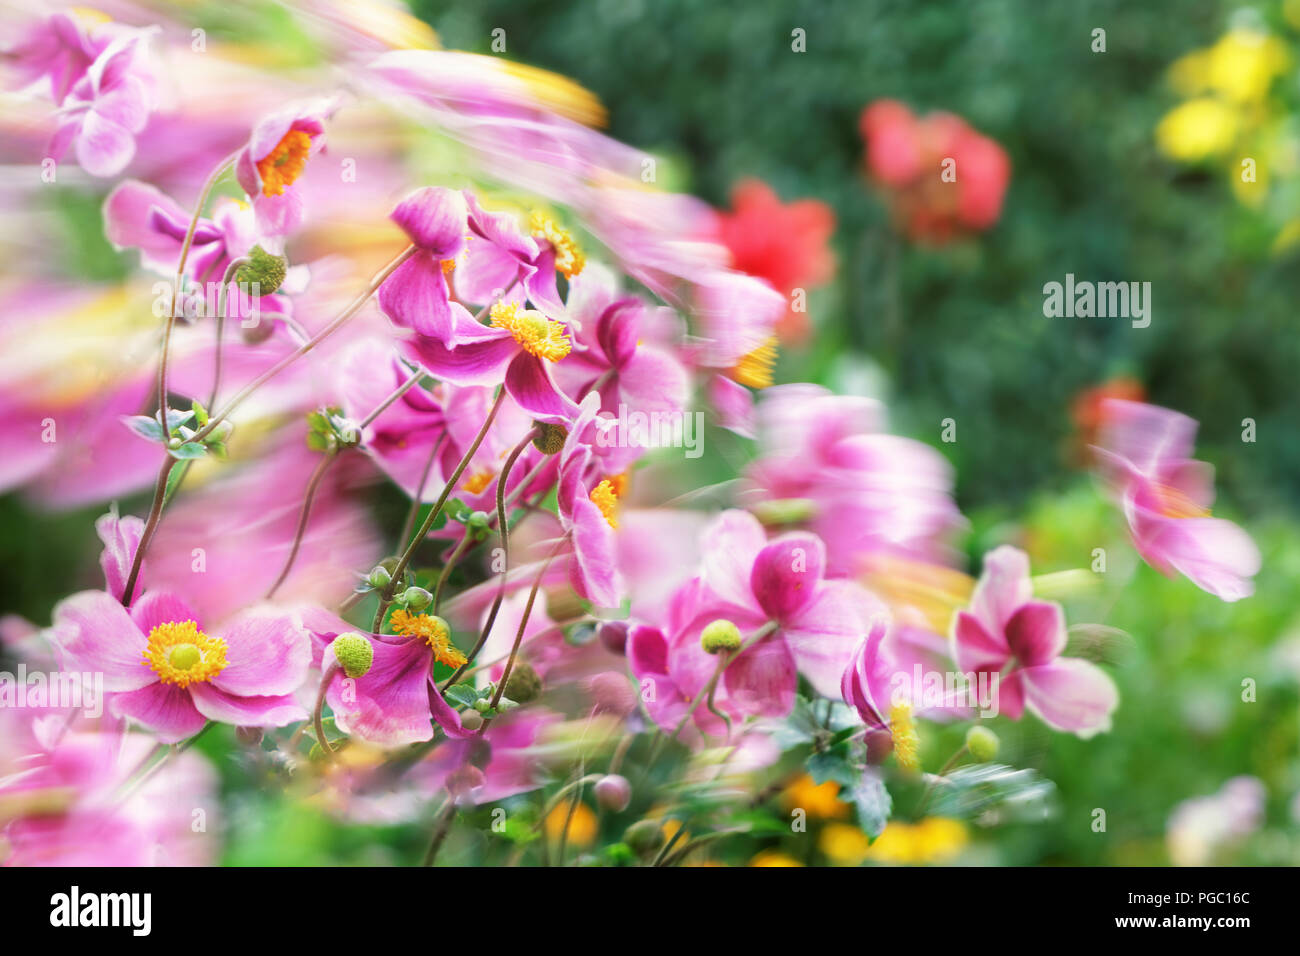 Composition of wind-driven and still flowers in pinks, lilacs and yellows Stock Photo